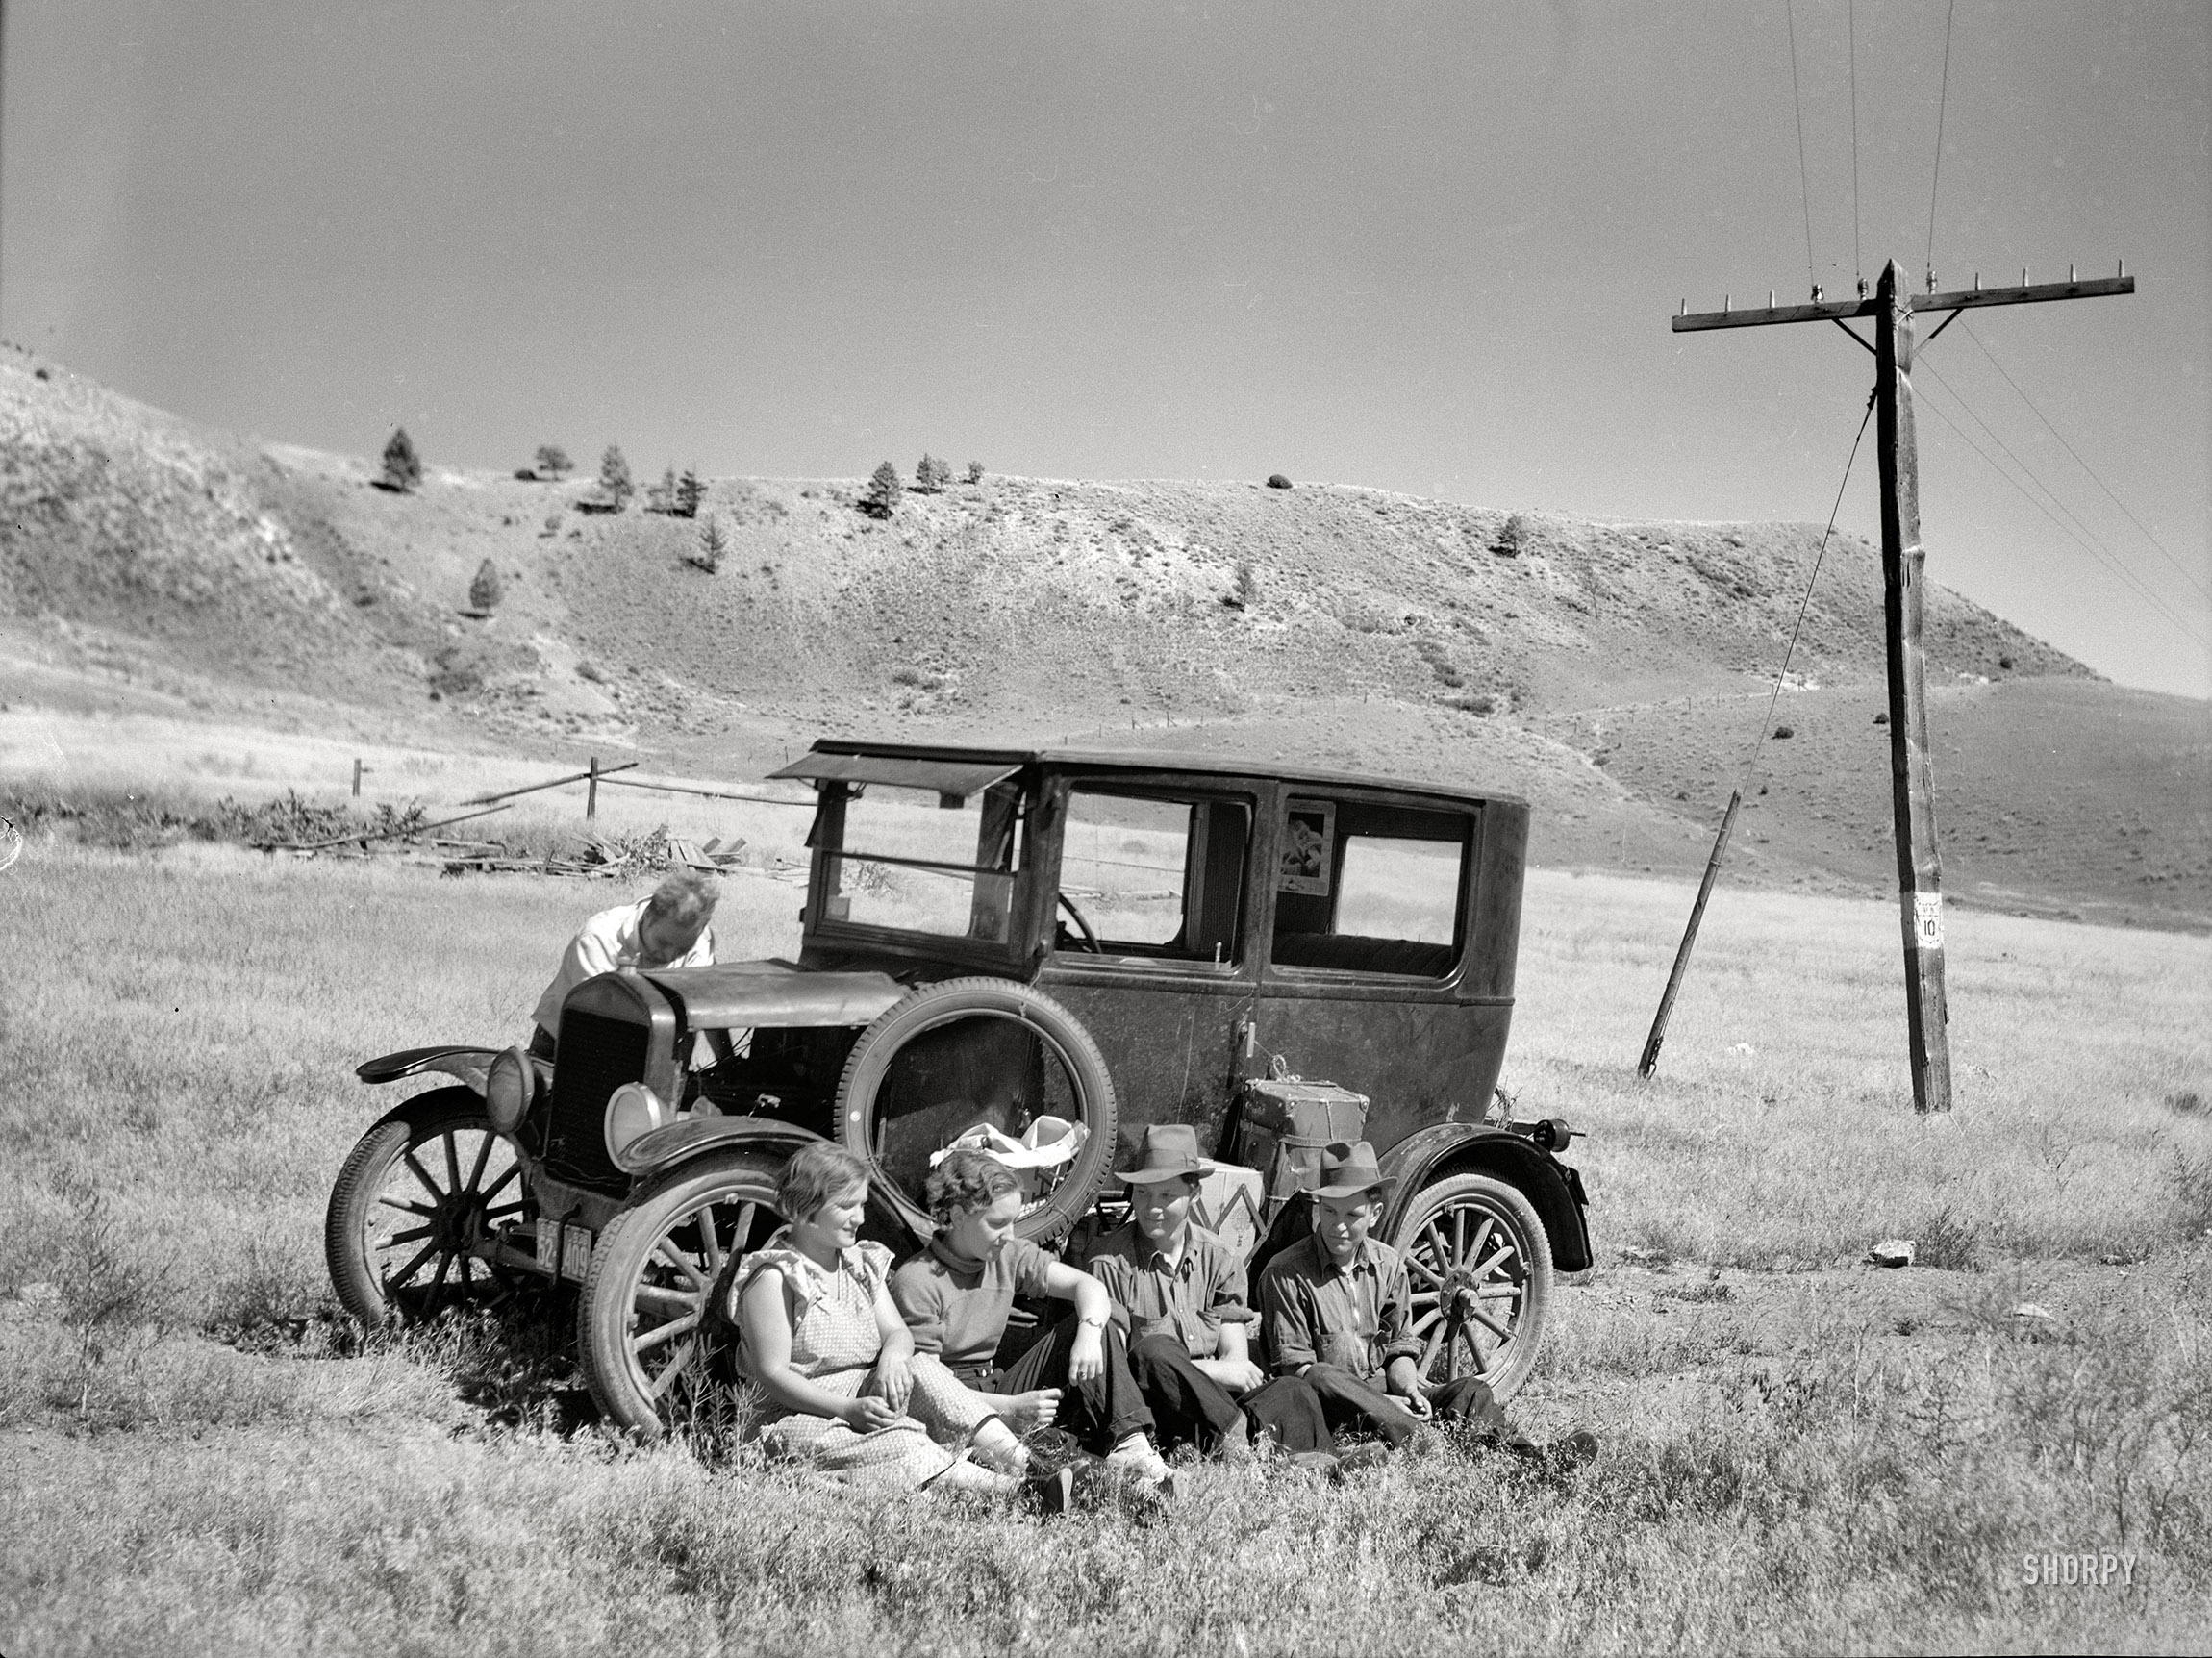 July 1936. "Vernon Evans and family of Lemmon, South Dakota, near Missoula, Montana, Highway 10. Leaving the grasshopper-ridden and drought-stricken area for a new start in Oregon and Washington. Make about 200 miles a day in Model T Ford." Our second glimpse of these travelers, last seen here. Medium-format negative by Arthur Rothstein, Resettlement Administration. View full size.